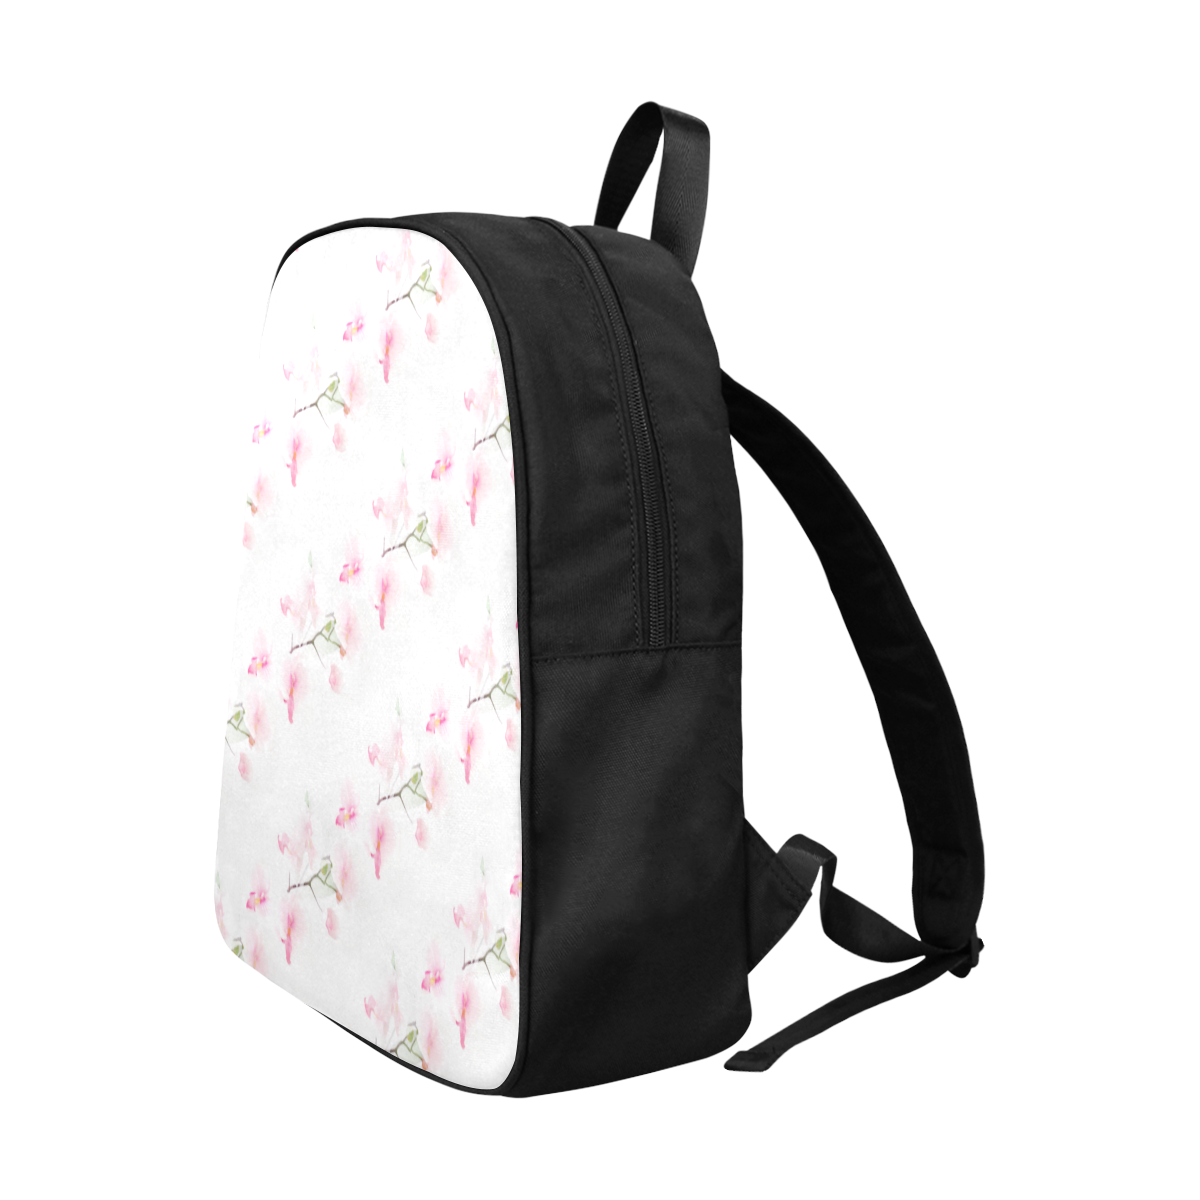 PATTERN ORCHIDÉES Fabric School Backpack (Model 1682) (Large)